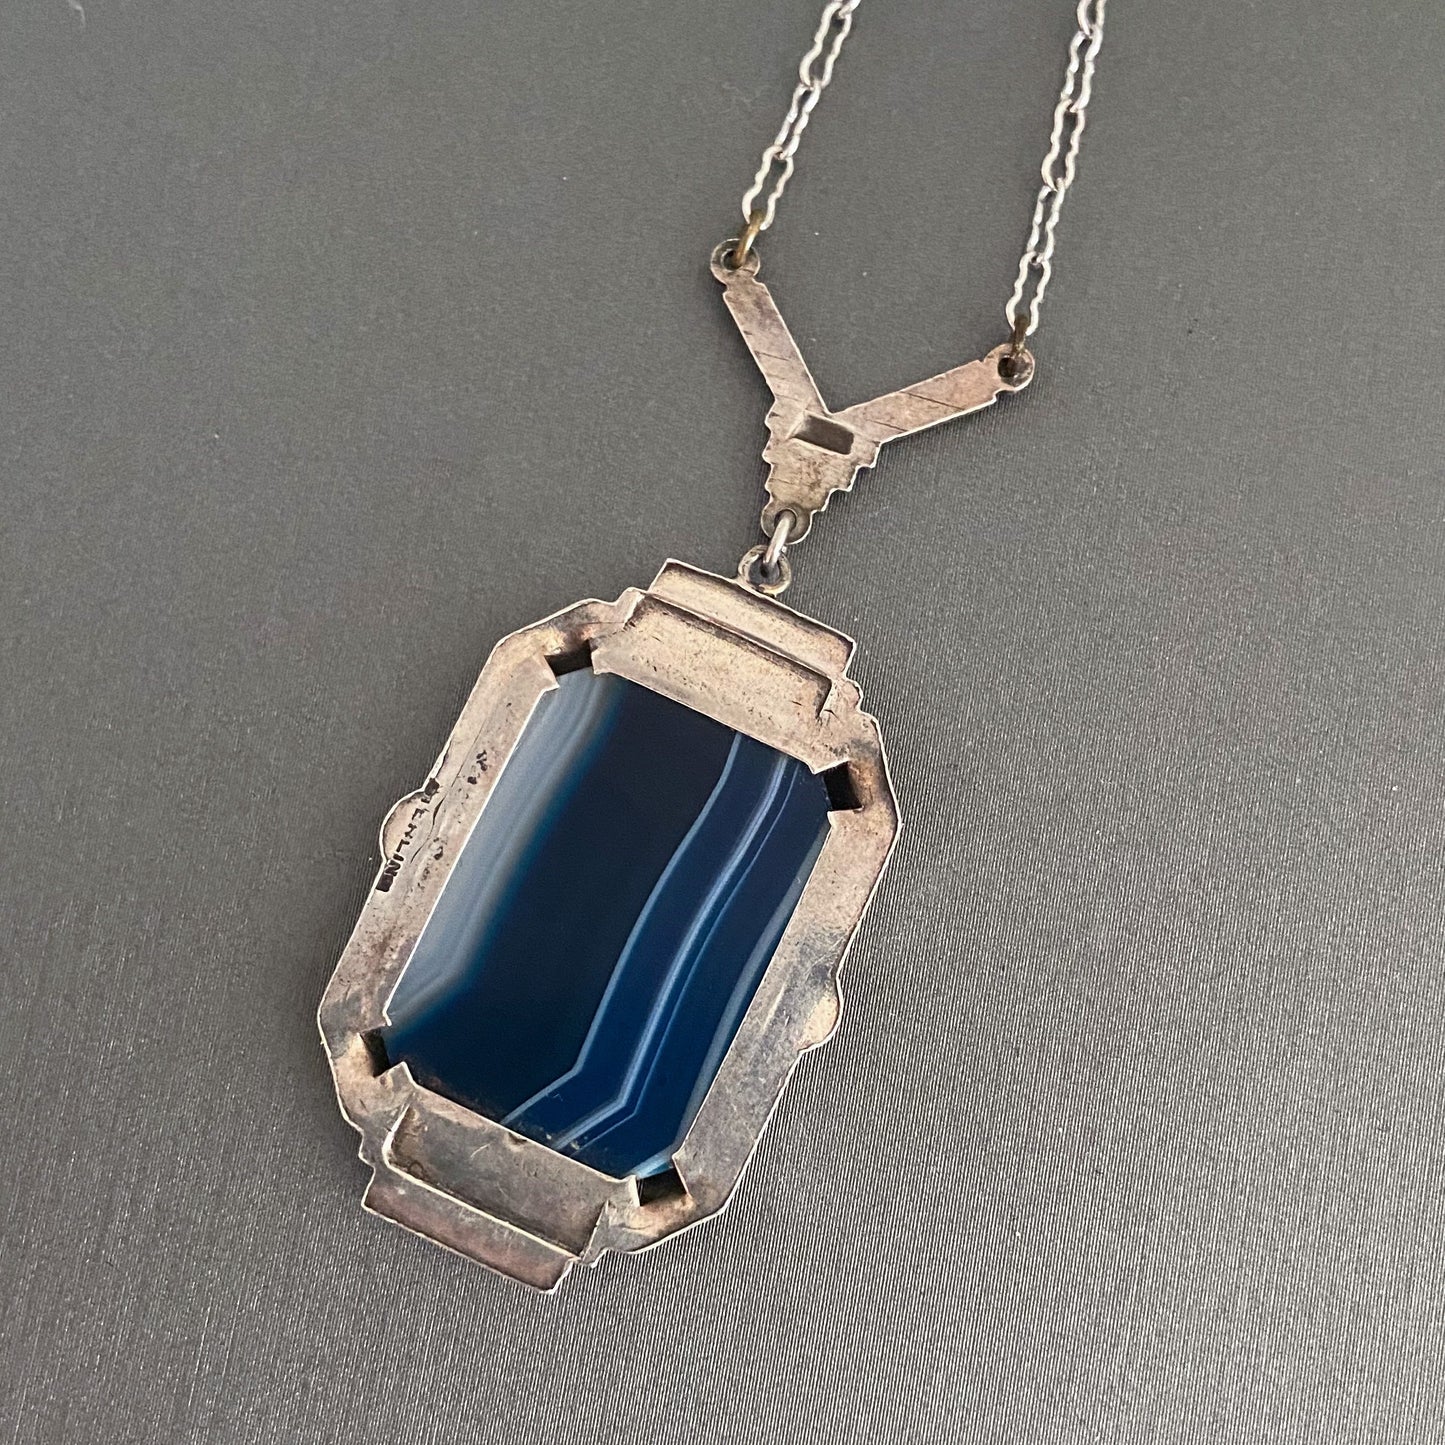 SOLD--Art Deco Marcasite and Blue Agate Necklace Sterling c. 1930